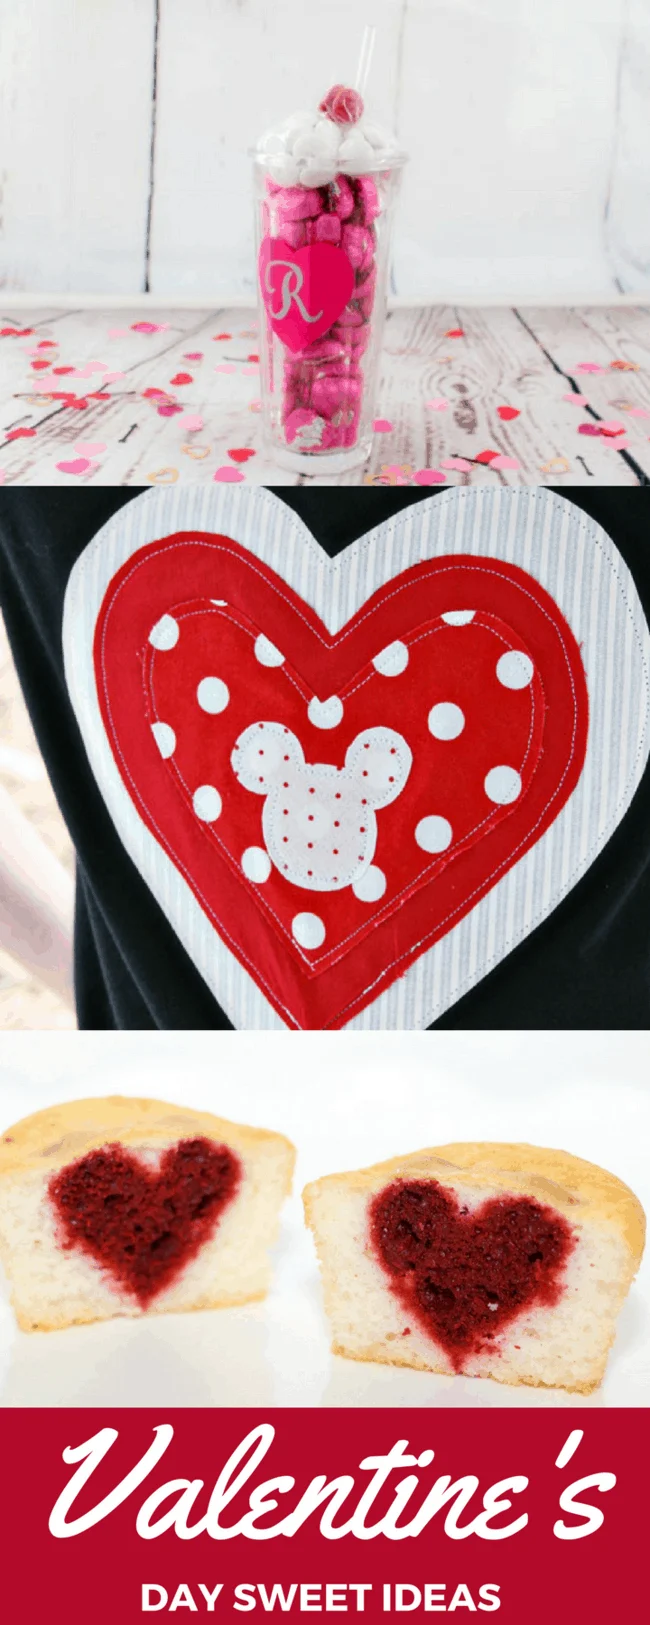 Valentine's Day: Crafts, Recipes, Travel and Disney! Sweet DIY ideas for parents